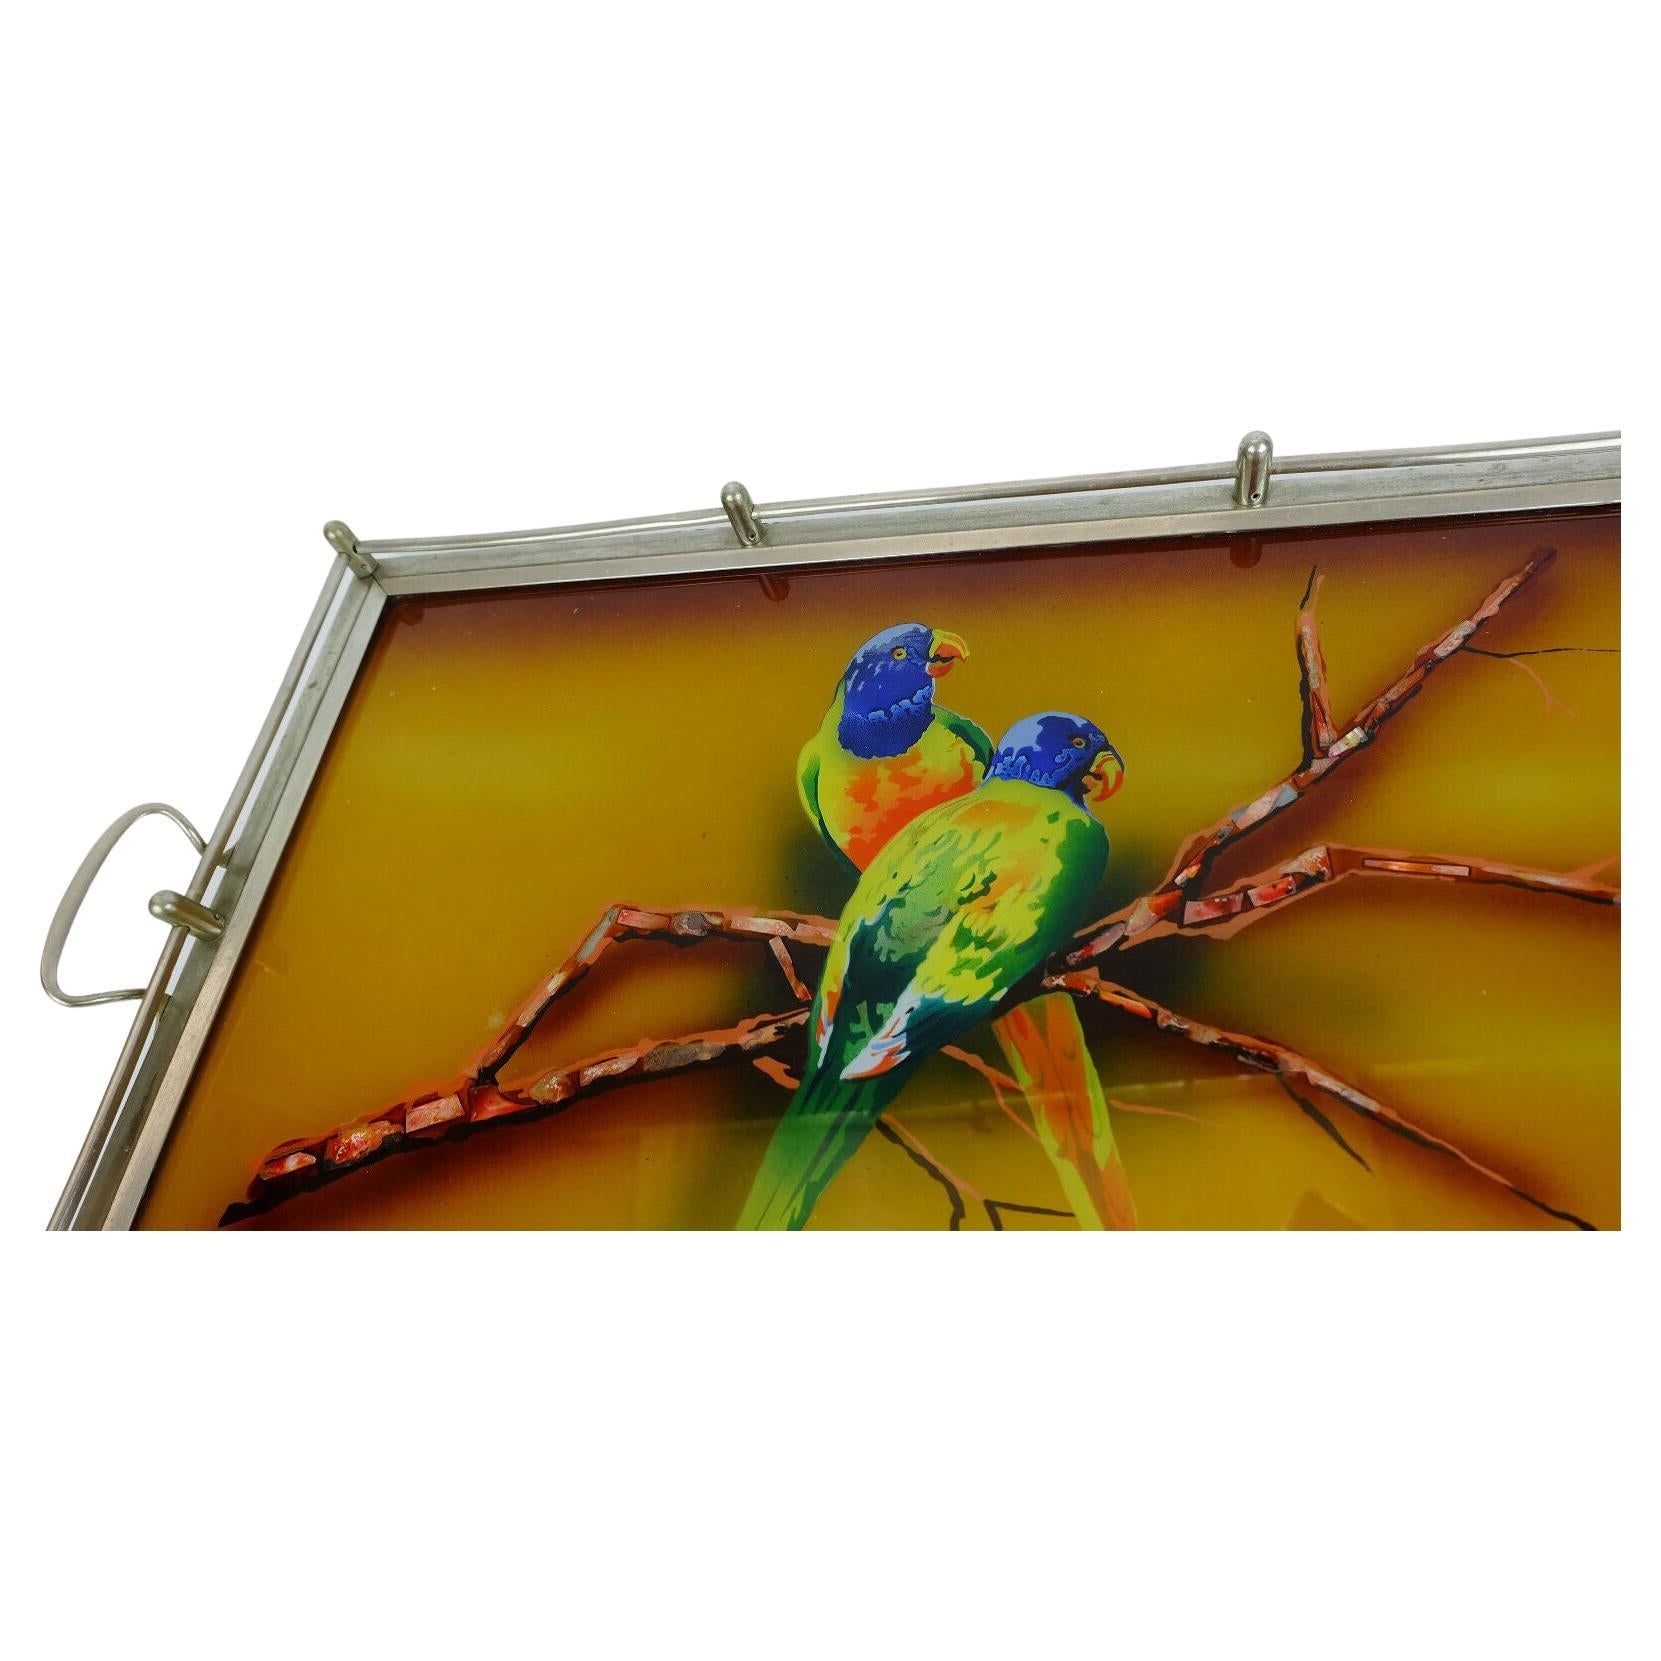 Beautiful very large old tray from the 1920s/1930s. The base is made of glass and has a reverse glass motif depicting a pair of parrots perched on a branch. The basic color is amber, the motif is in rainbow colors and mother-of-pearl inlays. The rim